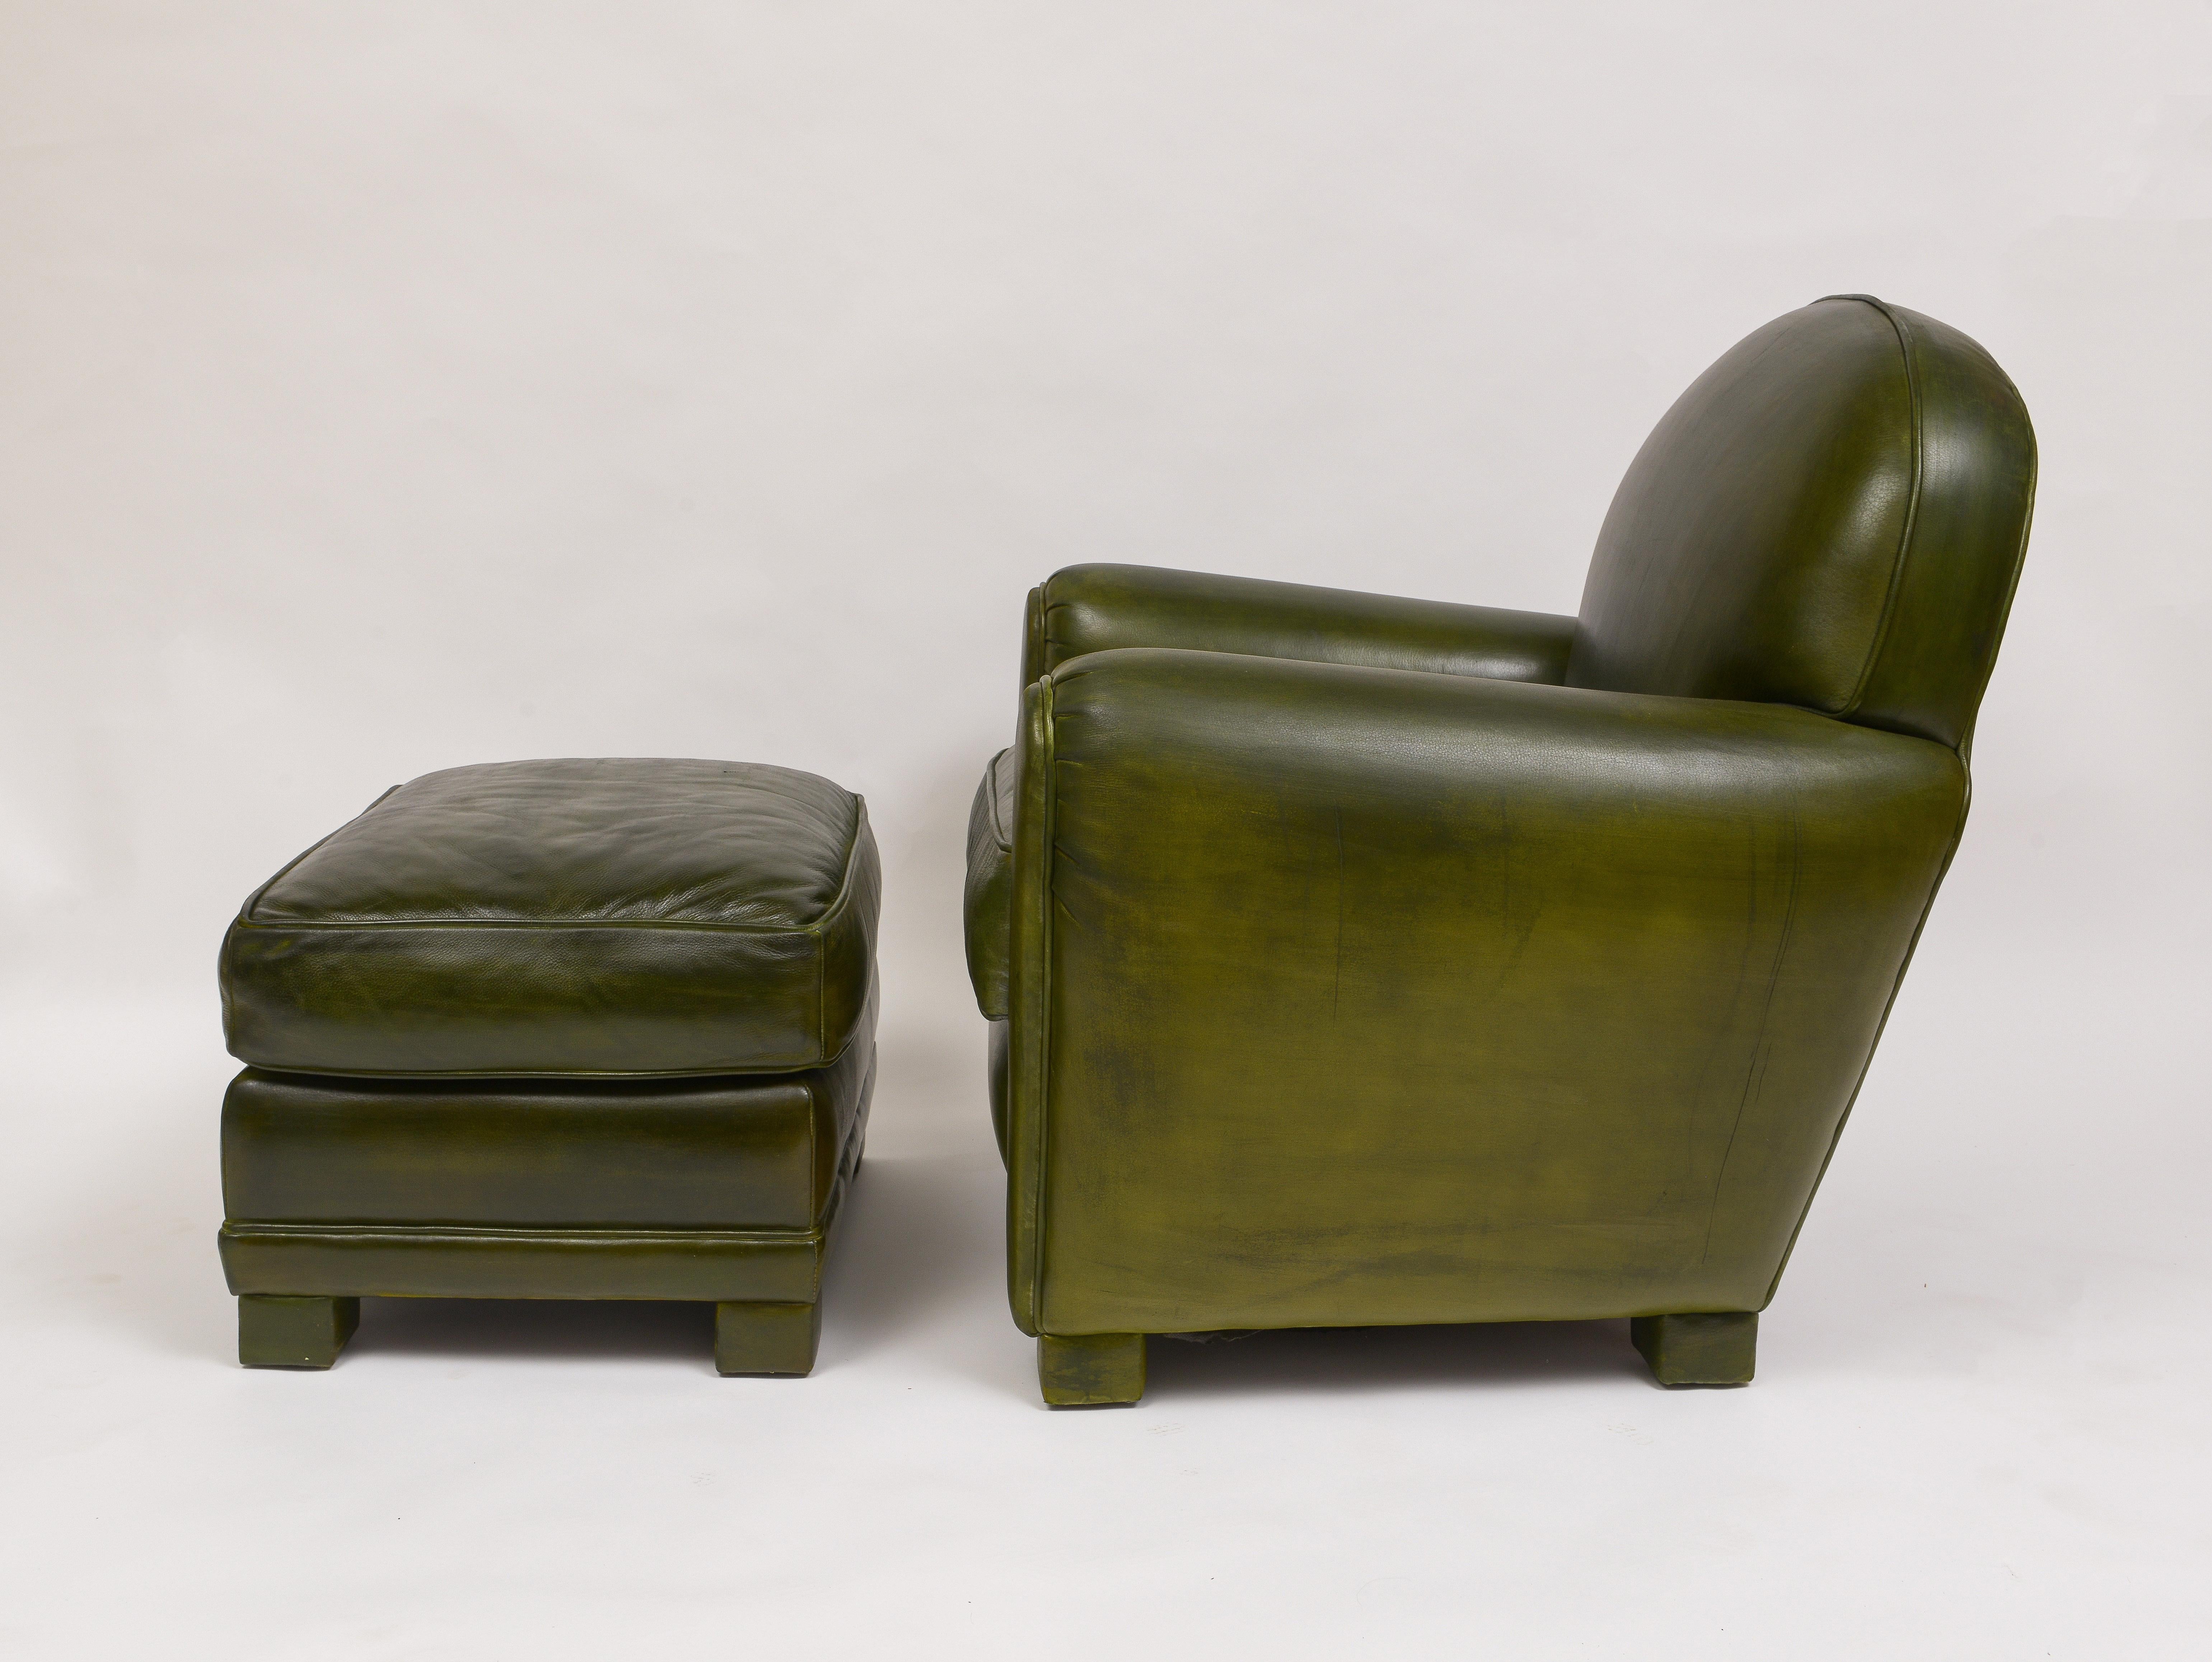 American Early 21st Century Green Leather Club Chairs With Ottomans- 4 Pieces For Sale